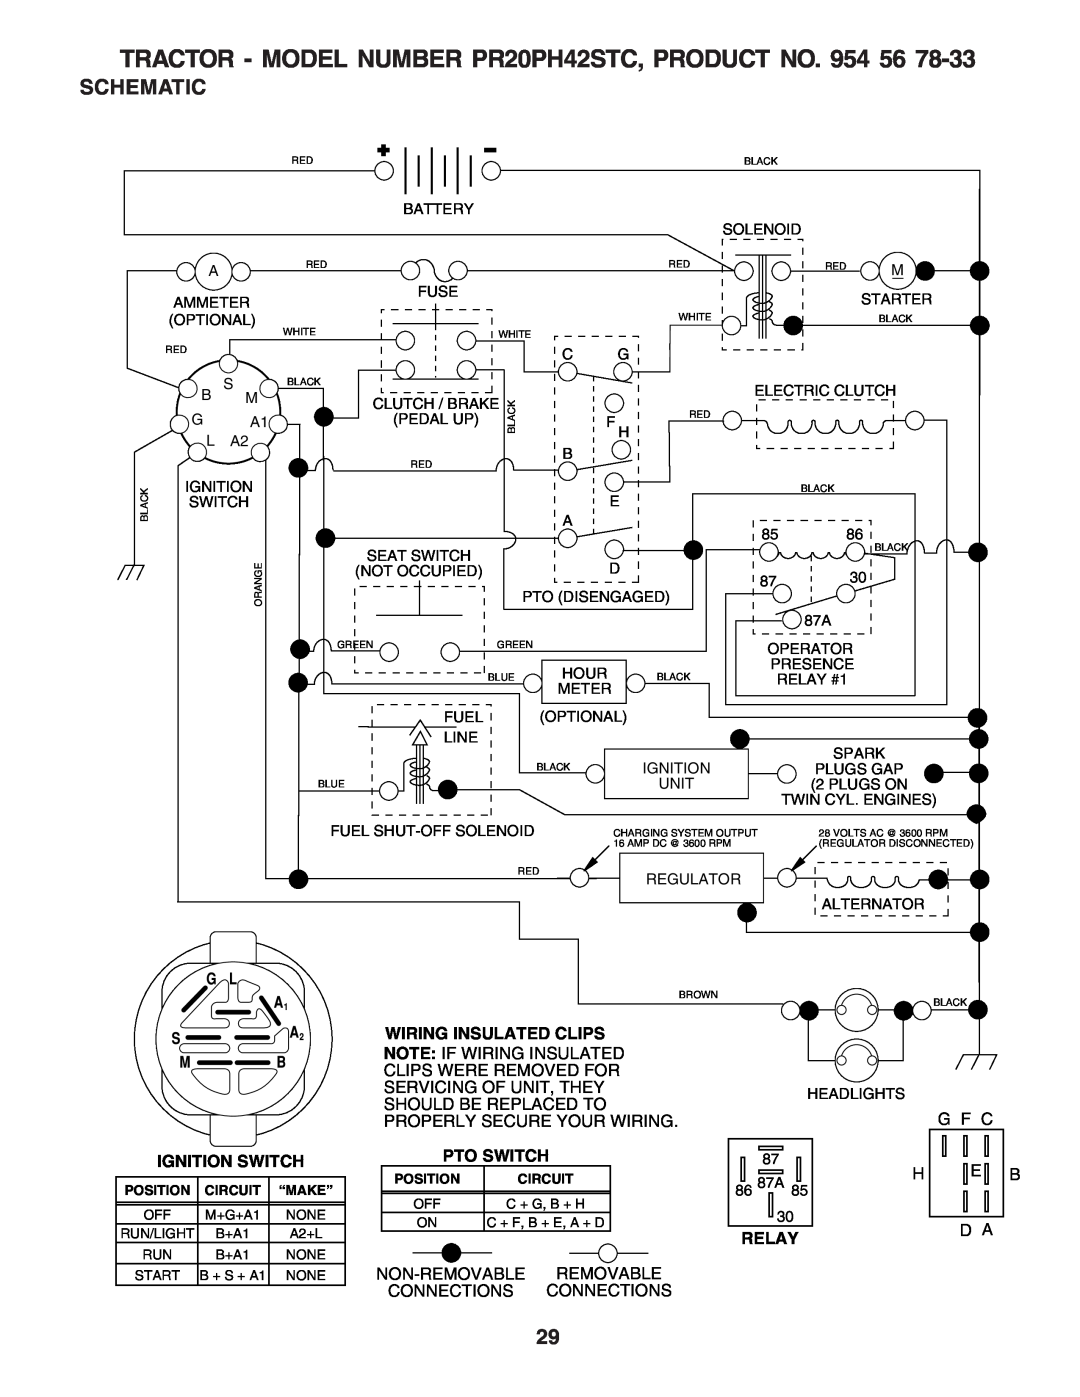 Poulan PR20PH42STC owner manual Schematic, Ignition Switch, Wiring Insulated Clips, Pto Switch, Relay 